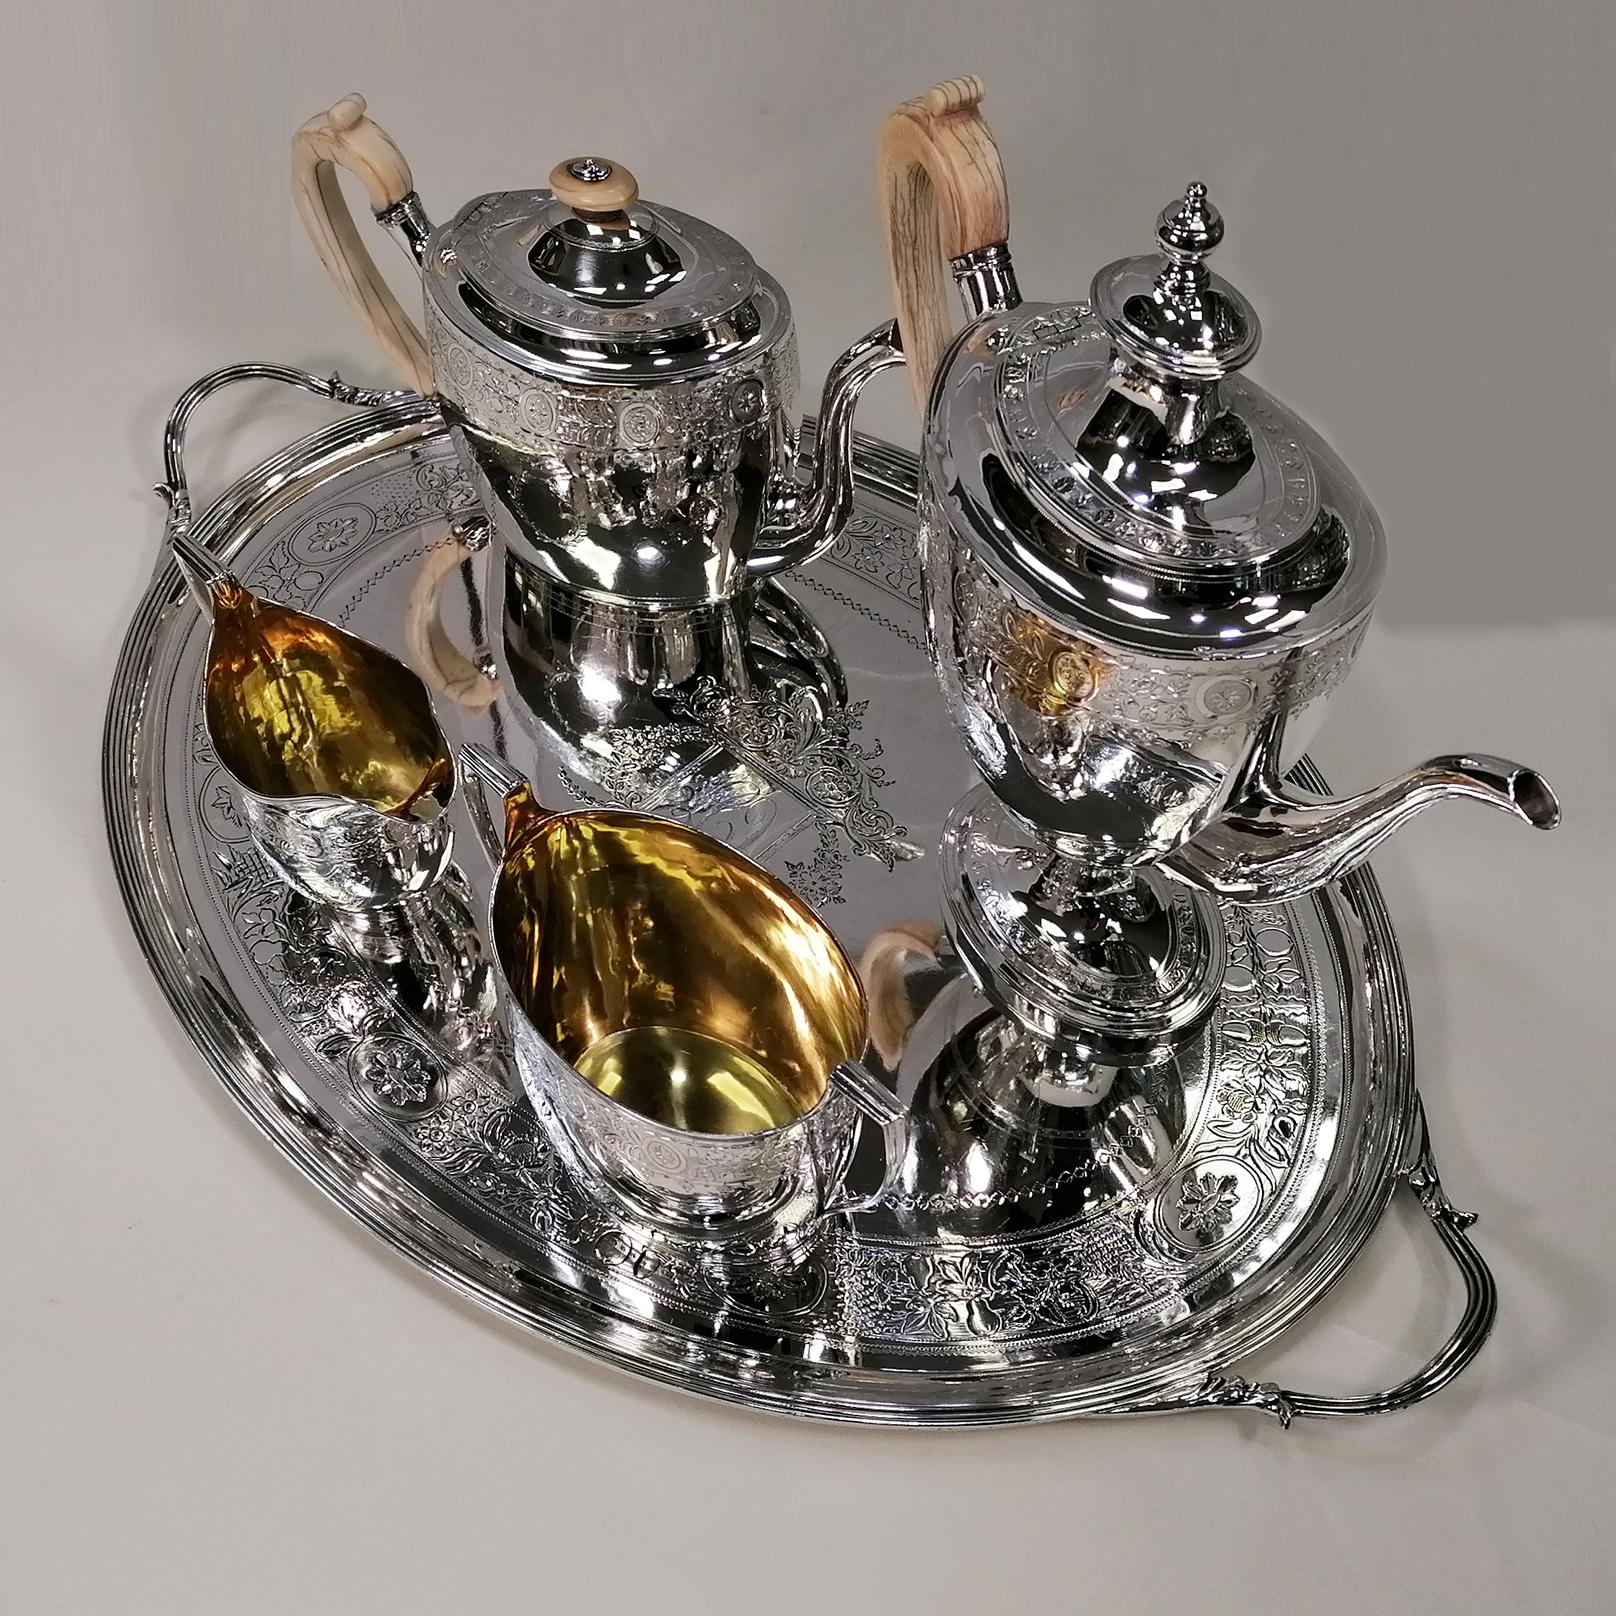 Antique George III Sterling Silver Tea-Coffeeset ivory Handles & Tray 1798-1800 For Sale 14